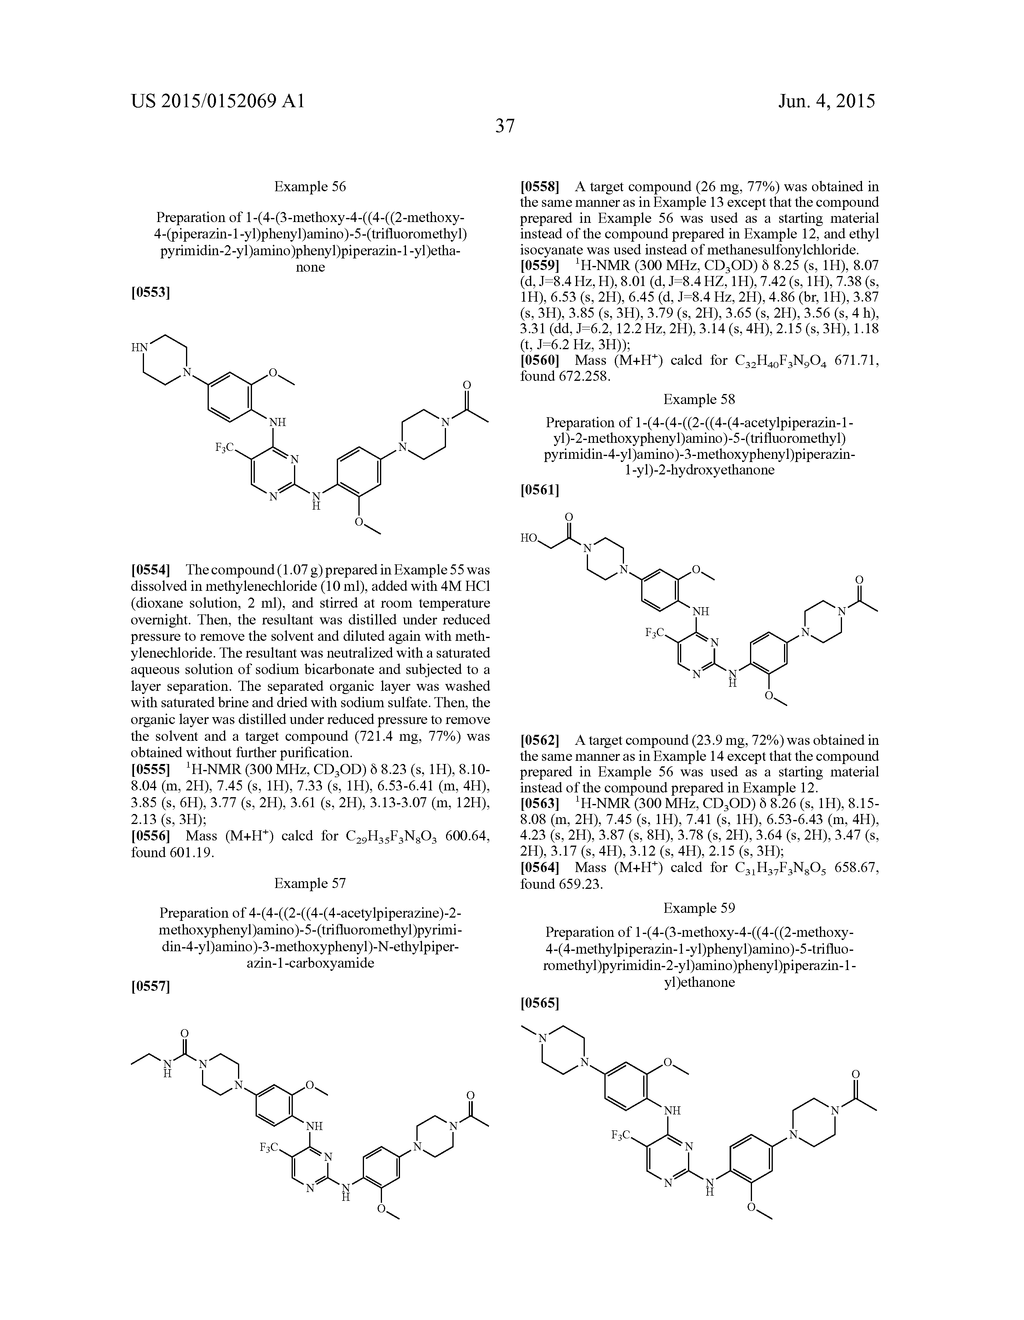 N2,N4-BIS(4-(PIPERAZINE-1-YL)PHENYL)PIRIMIDINE-2,4-DIAMINE DERIVATIVE OR     PHARMACEUTICALLY ACCEPTABLE SALT THEREOF, AND COMPOSITION CONTAINING SAME     AS ACTIVE INGREDIENT FOR PREVENTING OR TREATING CANCER - diagram, schematic, and image 41